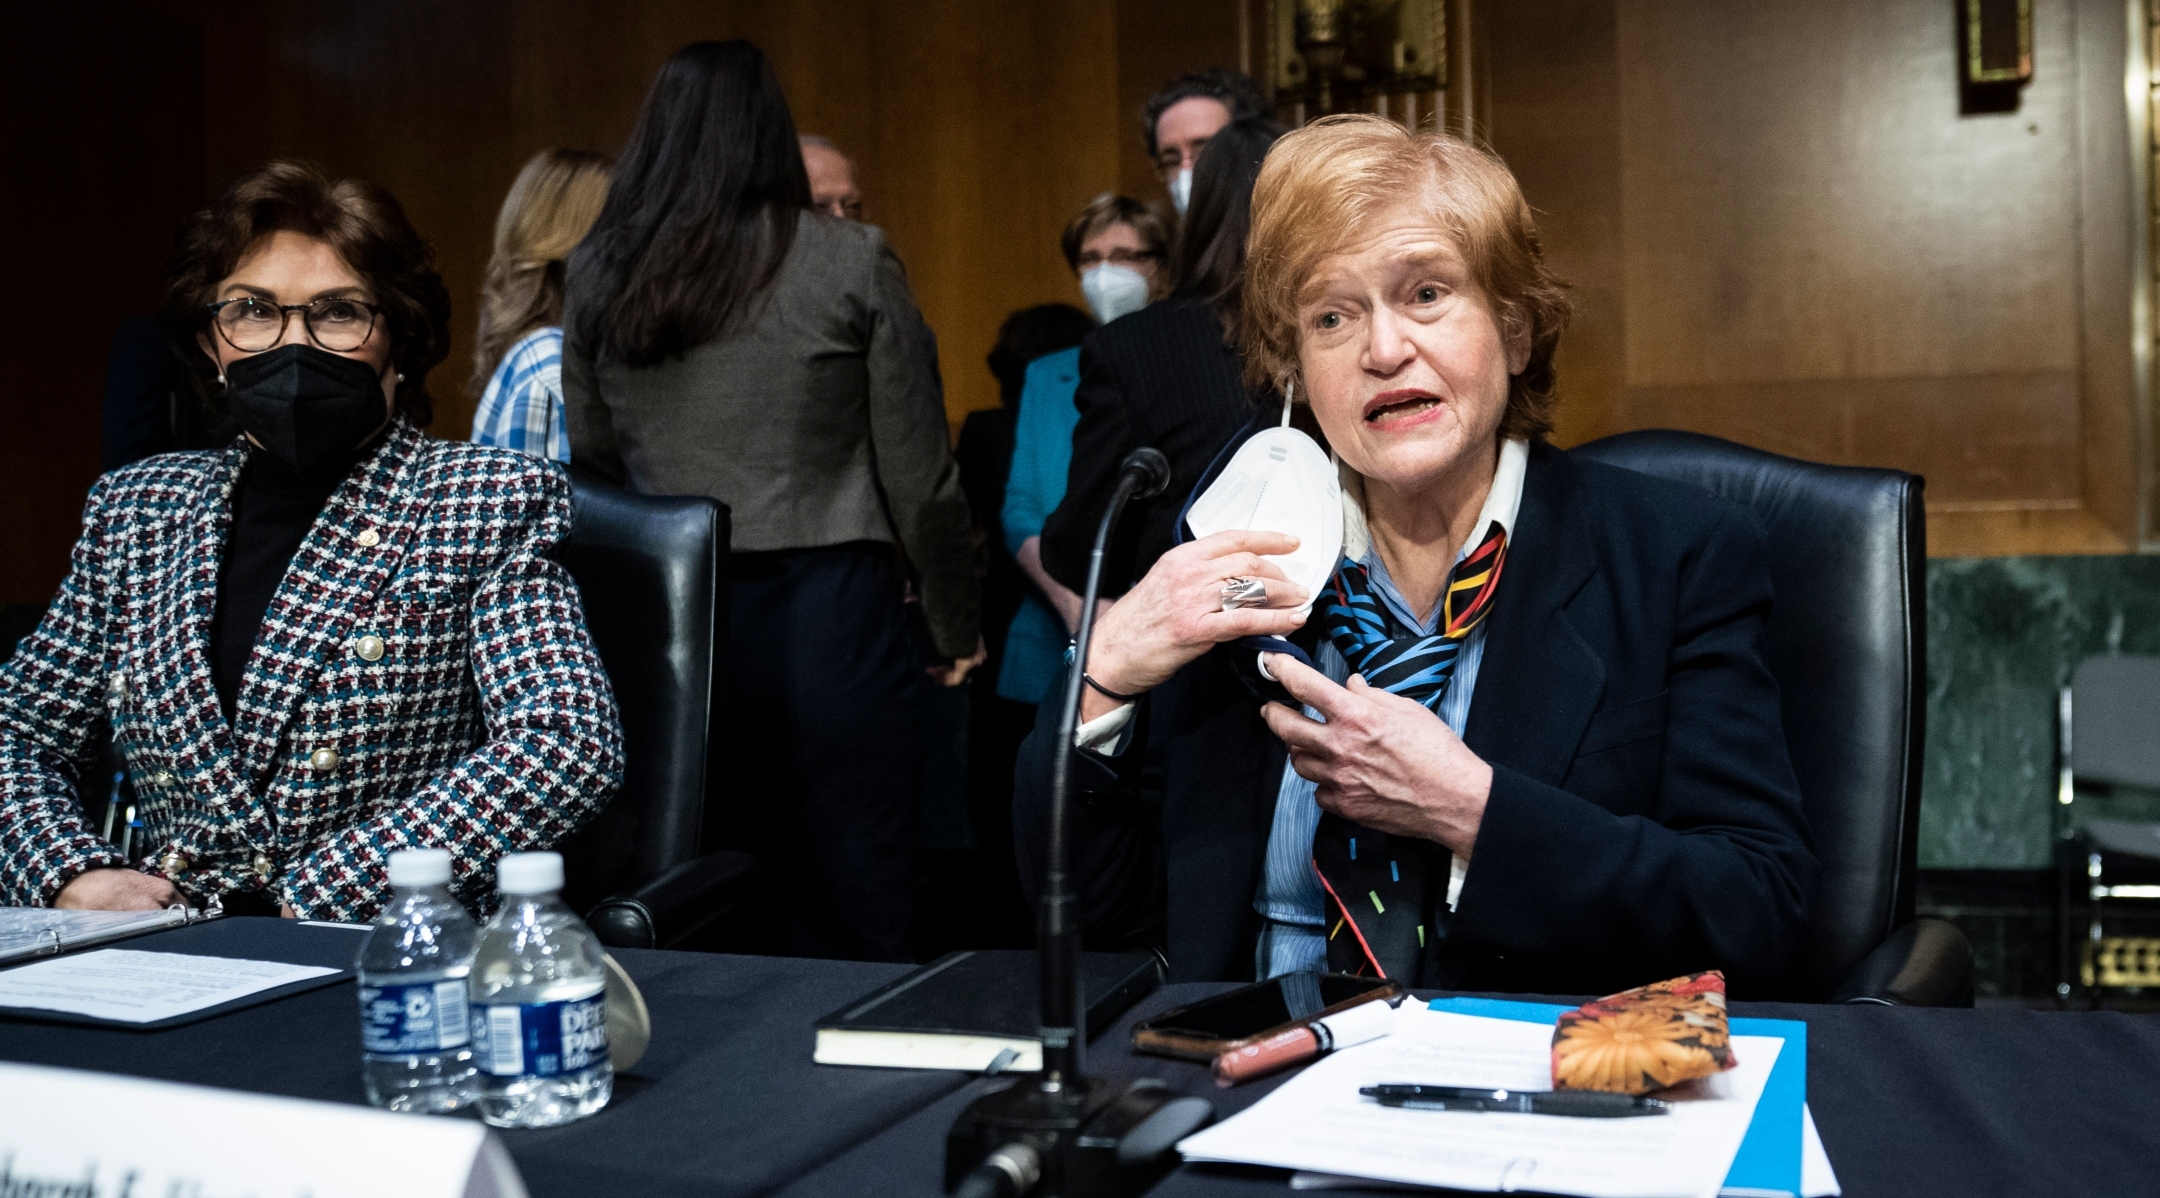 Deborah E. Lipstadt, nominated to be Special Envoy to Monitor and Combat Anti-Semitism, with the rank of Ambassador, appears during her Senate Foreign Relations nomination hearing on Capitol Hill, Feb. 08, 2022. (Jabin Botsford/The Washington Post via Getty Images)